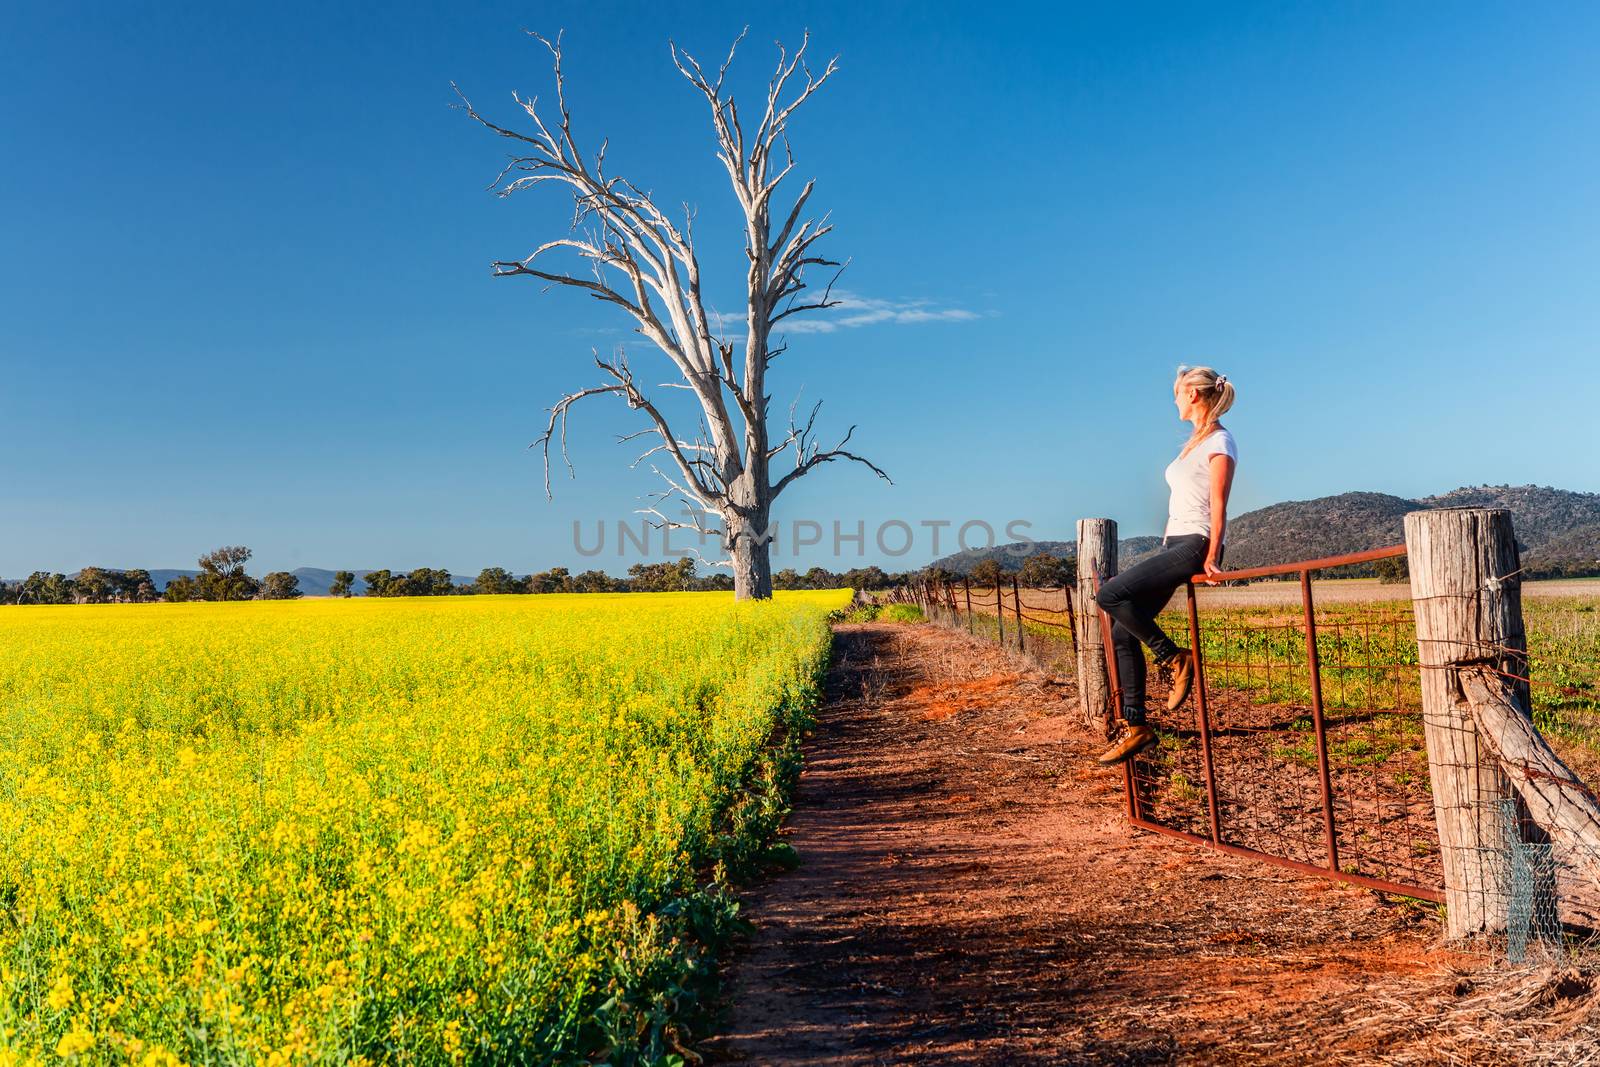 Country woman basking in the spring sunshine looking out over the fields of canola flowering bright yellow